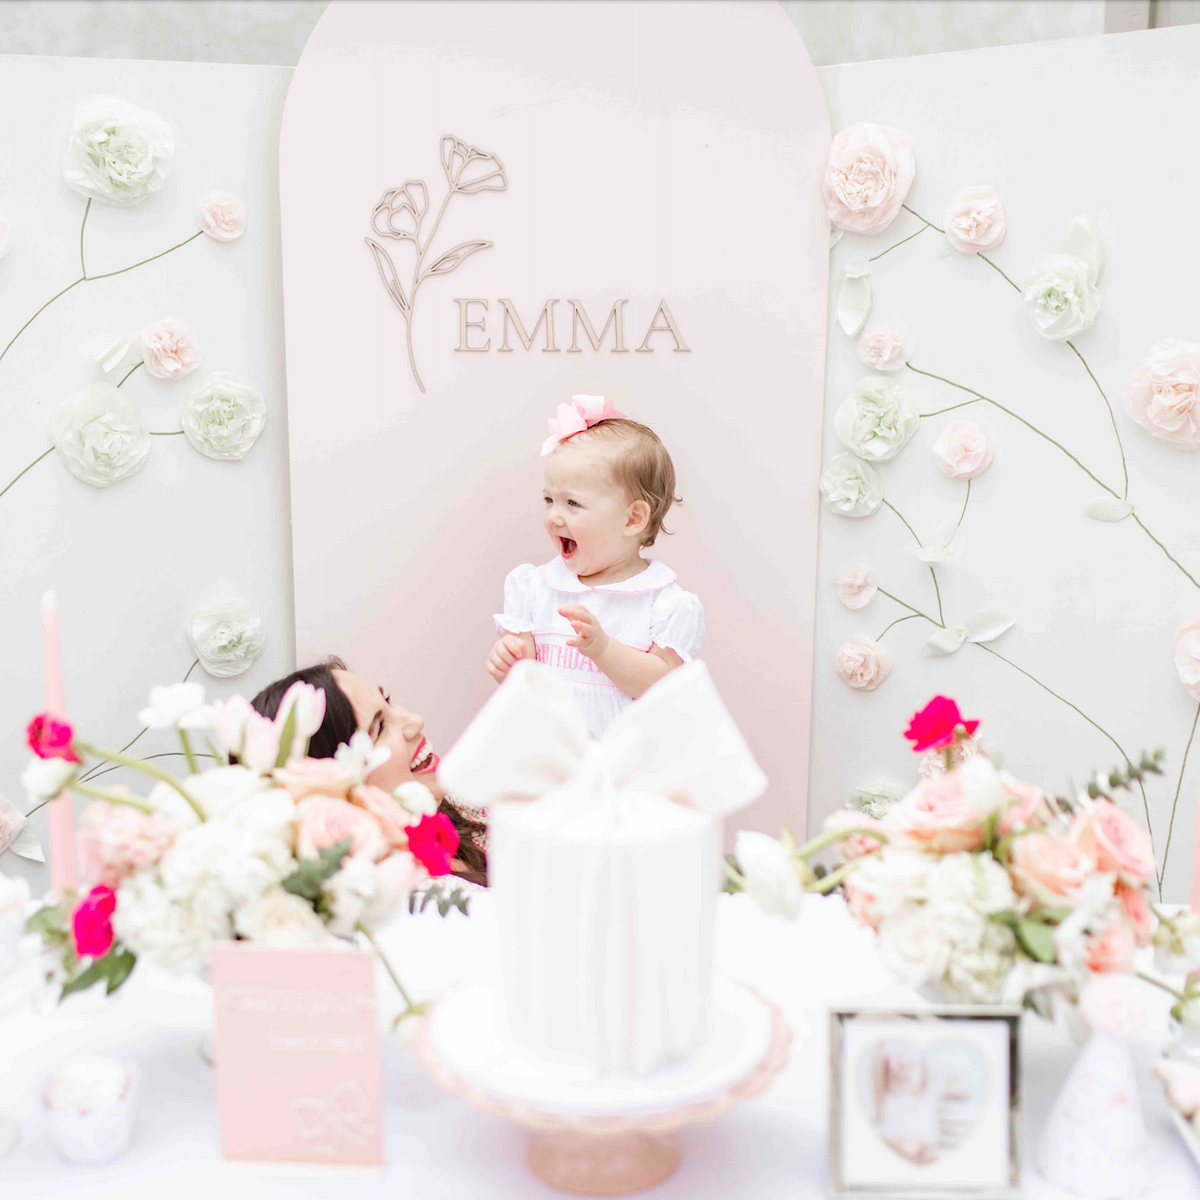 A Beautiful “Bunnies & Bows” Themed Girl's First Birthday Party